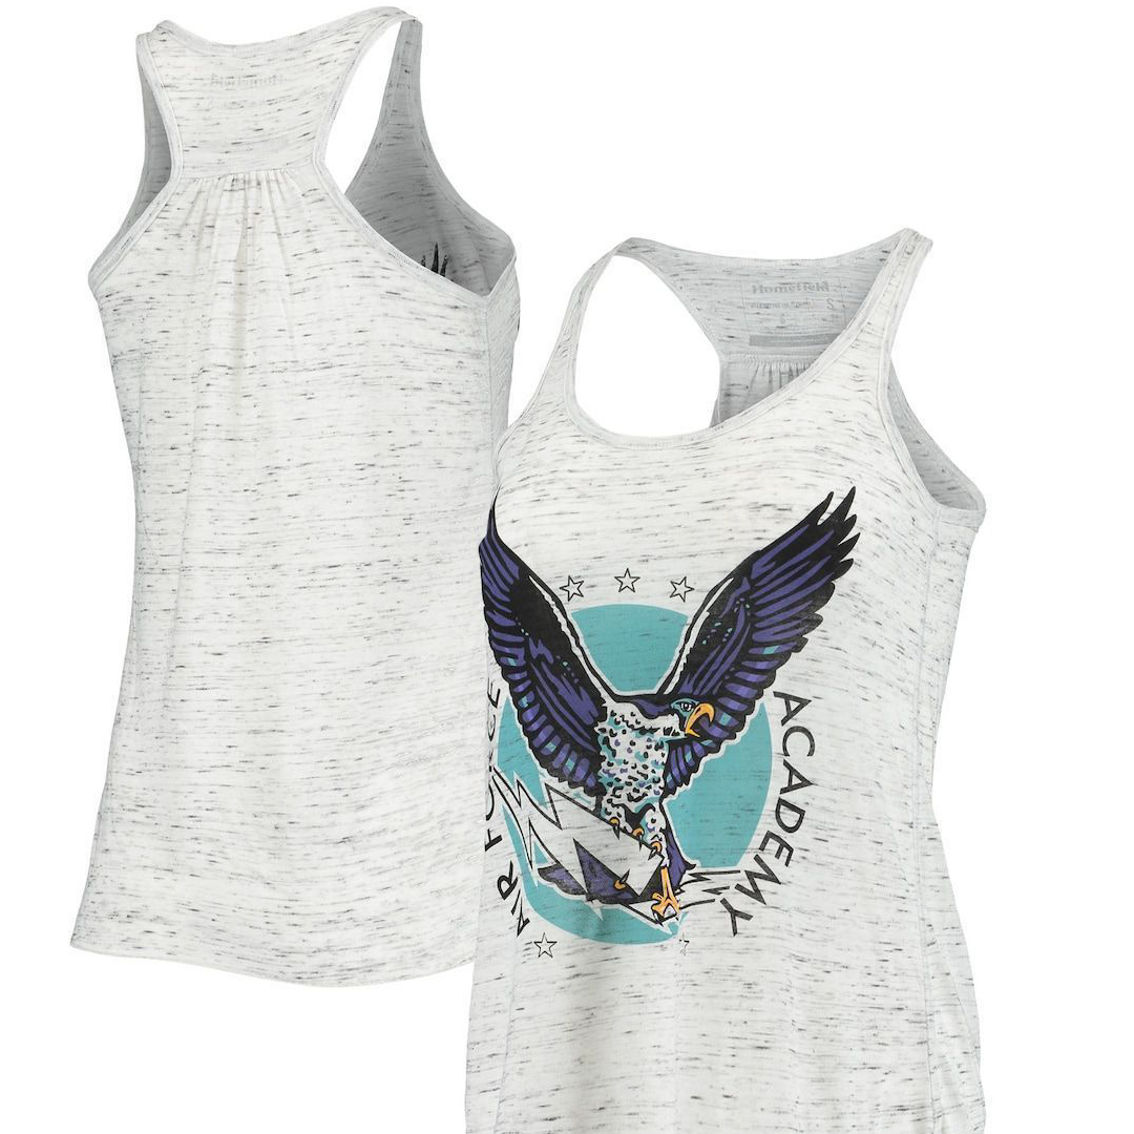 Homefield Women's Ash Air Force Falcons Vintage Racerback Tank Top - Image 2 of 4